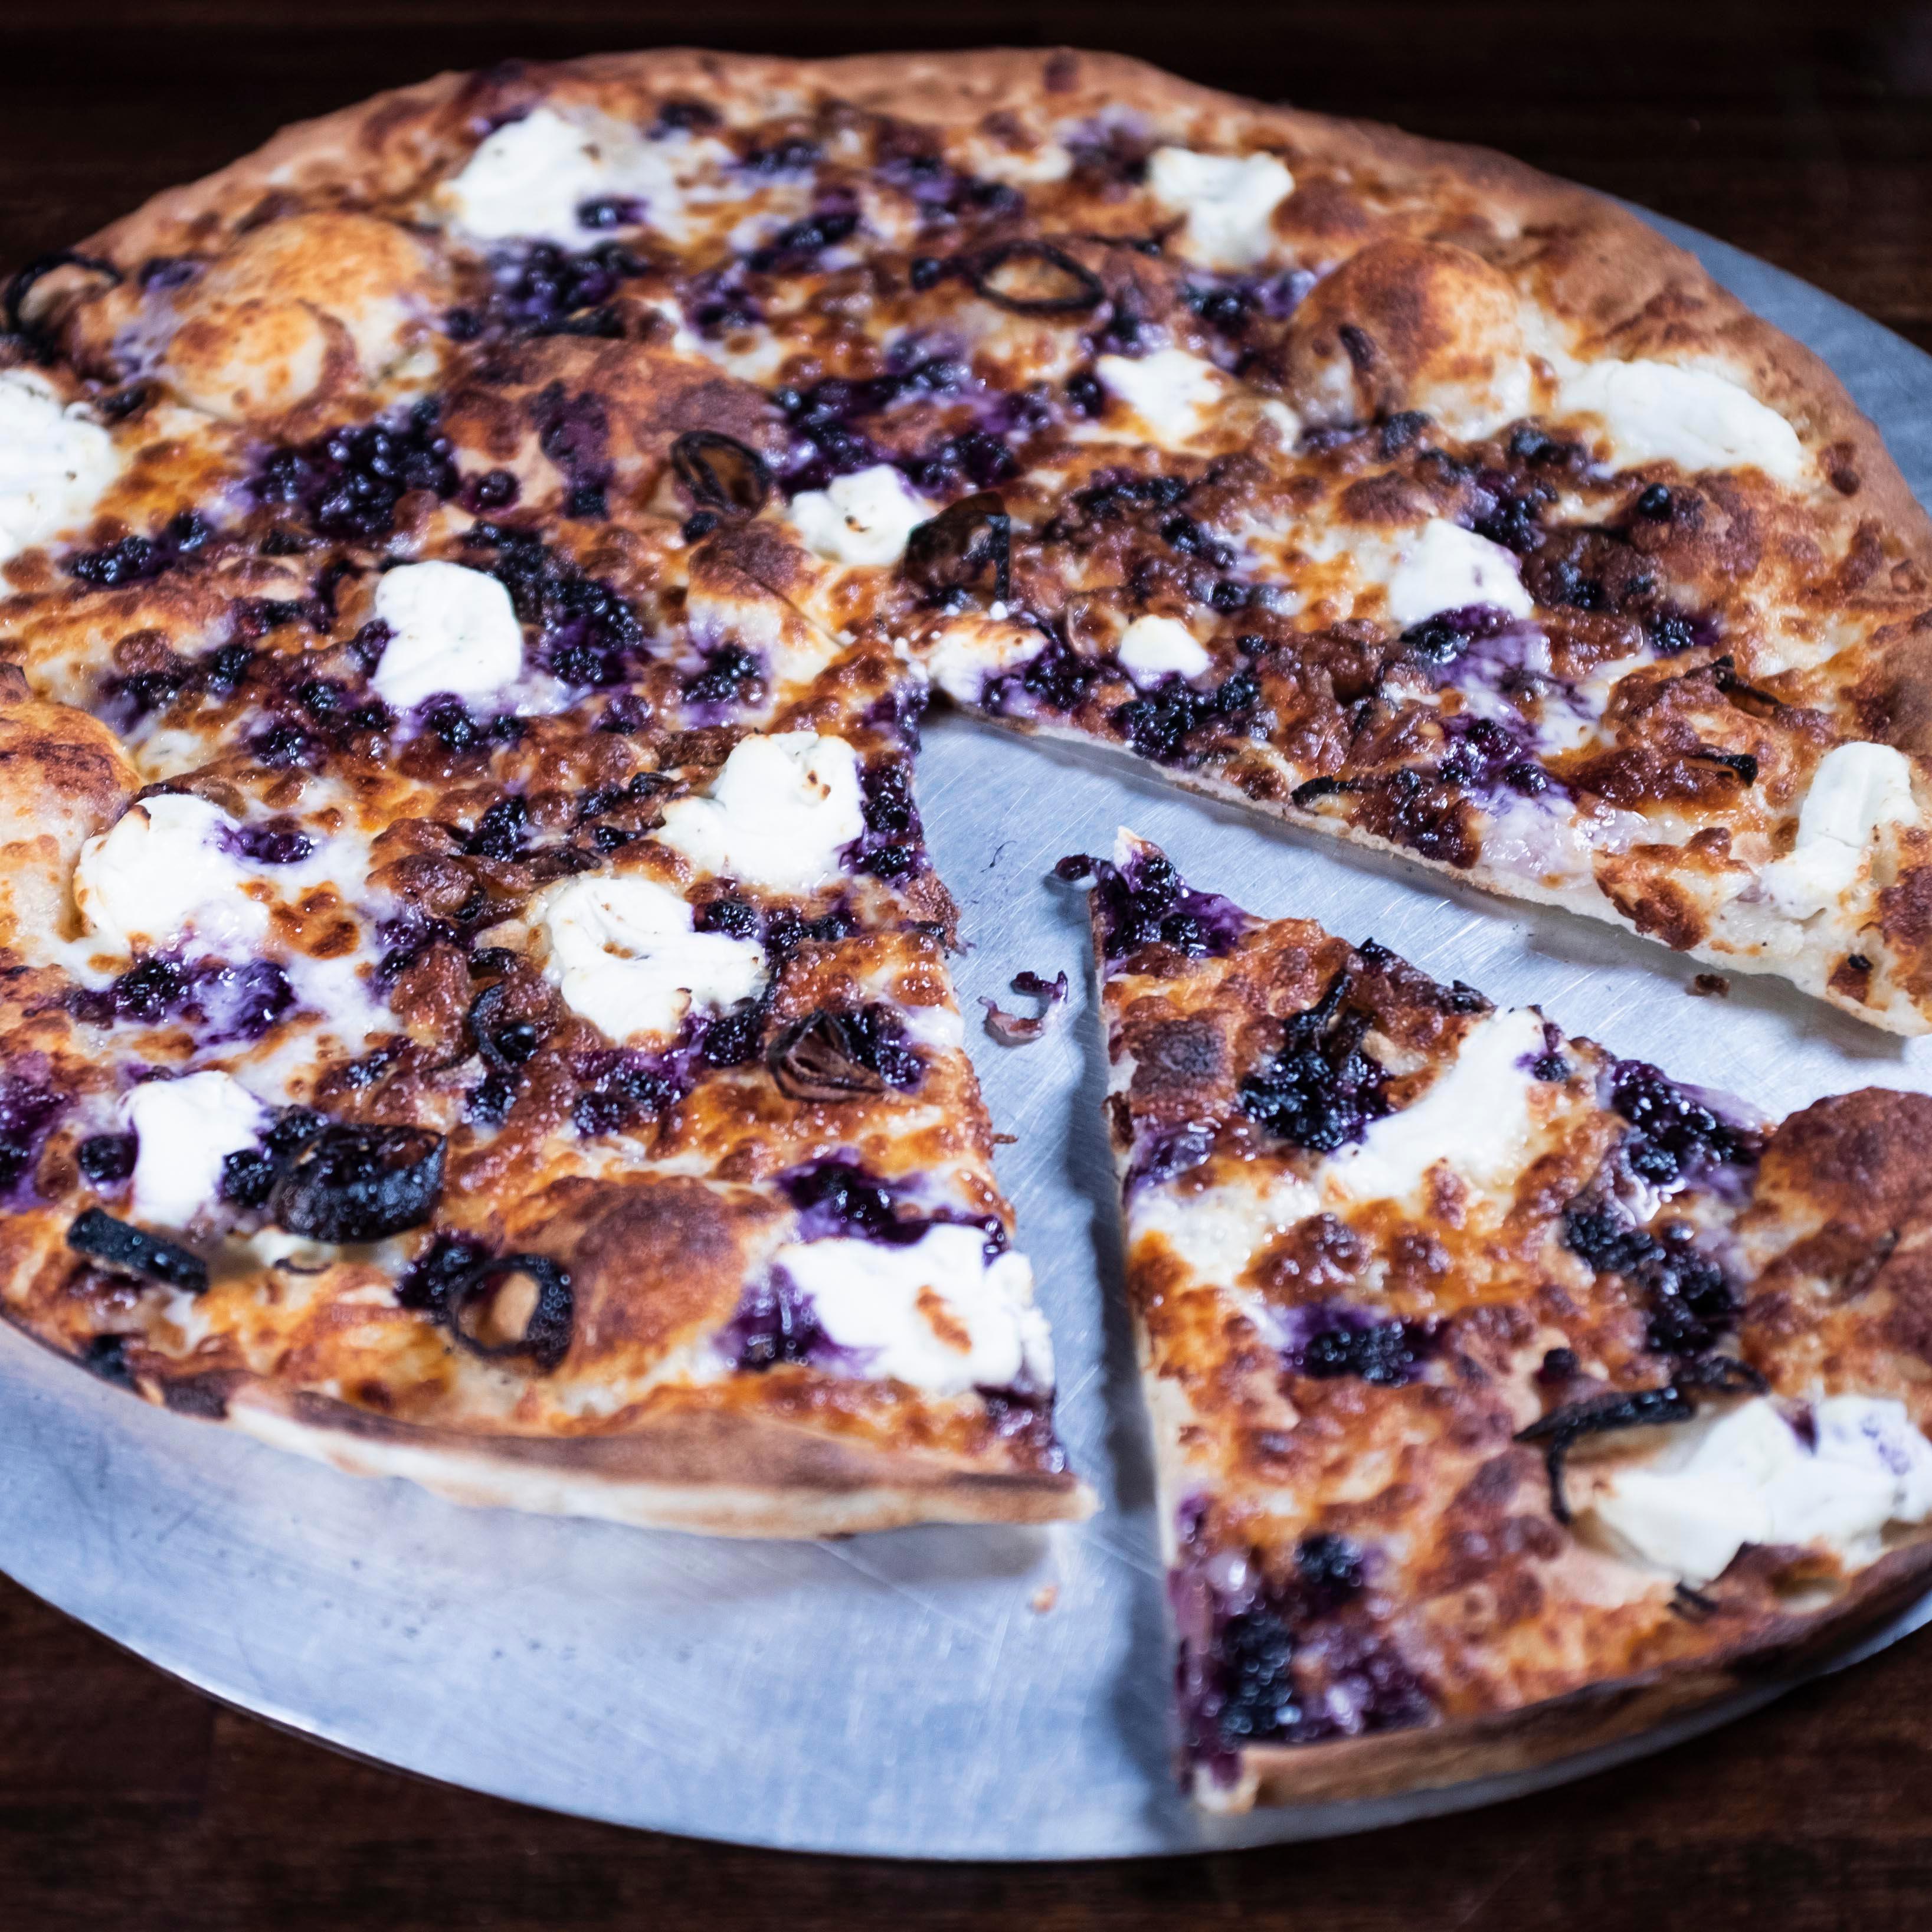 Gourmet Maine Blueberry Pizza